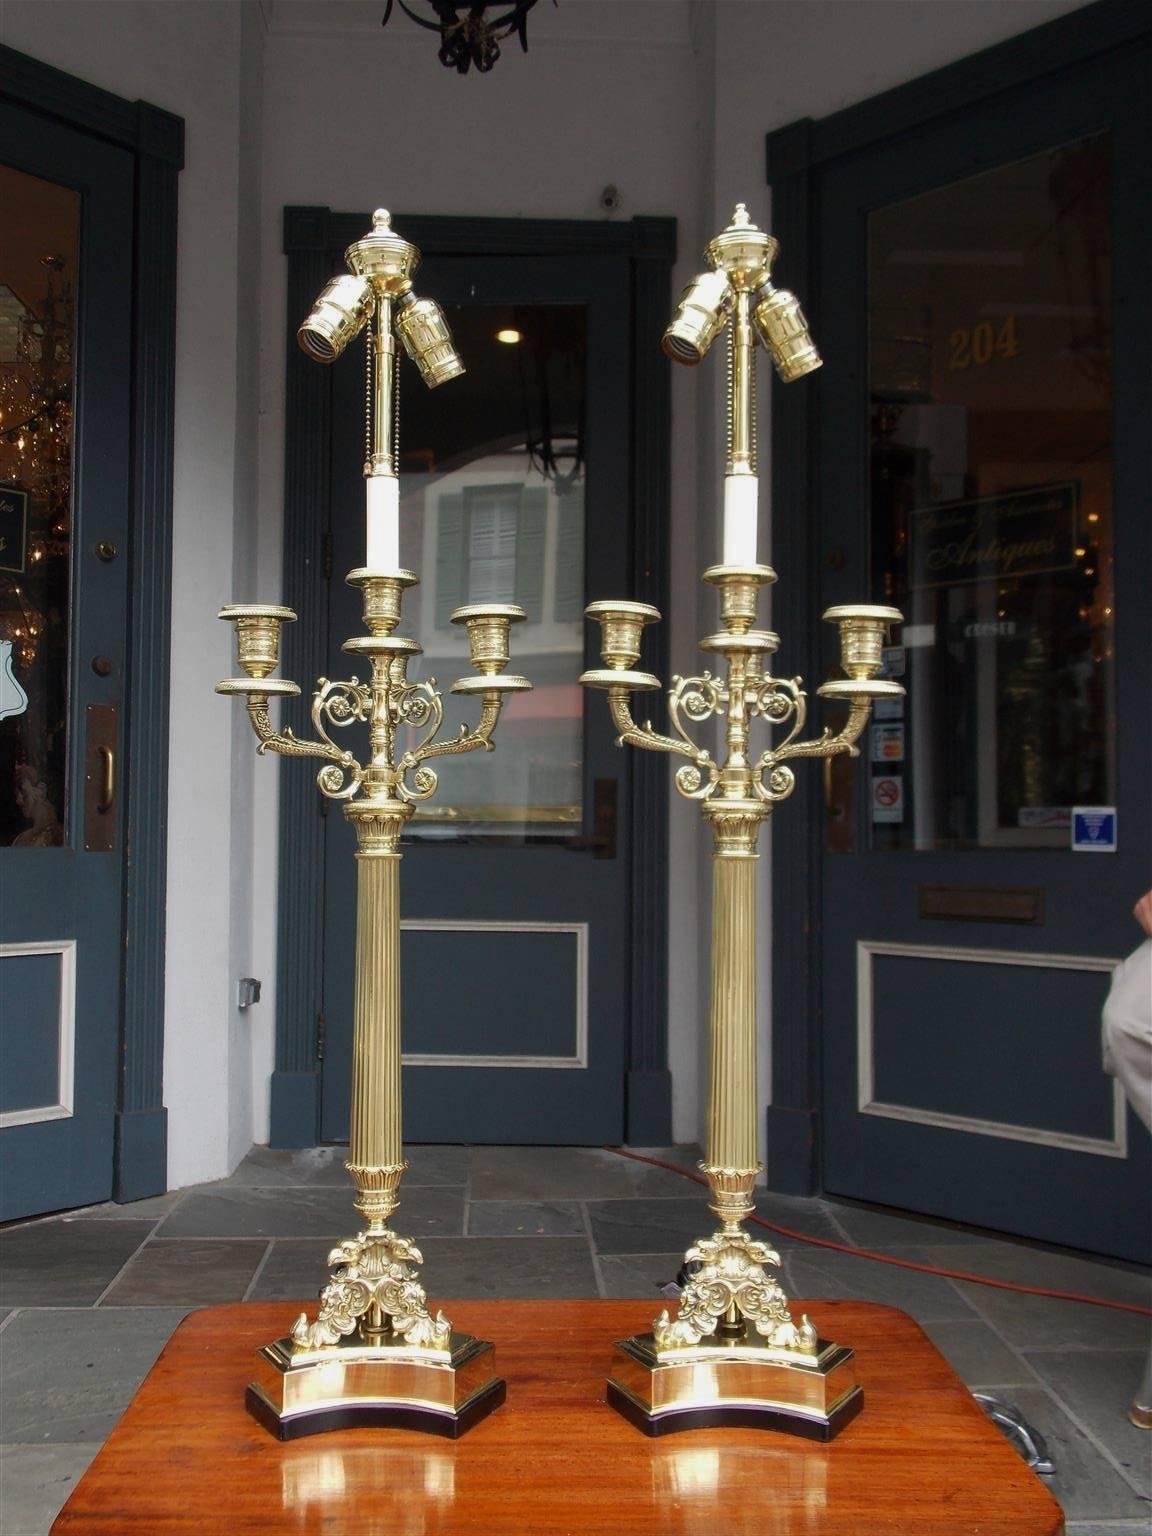 Pair of French brass candelabra lamps with four upper bobeches, decorative scrolled floral work and beaded hand chasing. Lamps have fluted centered columns and terminate on Eagle acanthus tripod painted wood bases, Early 19th century. Candelabras